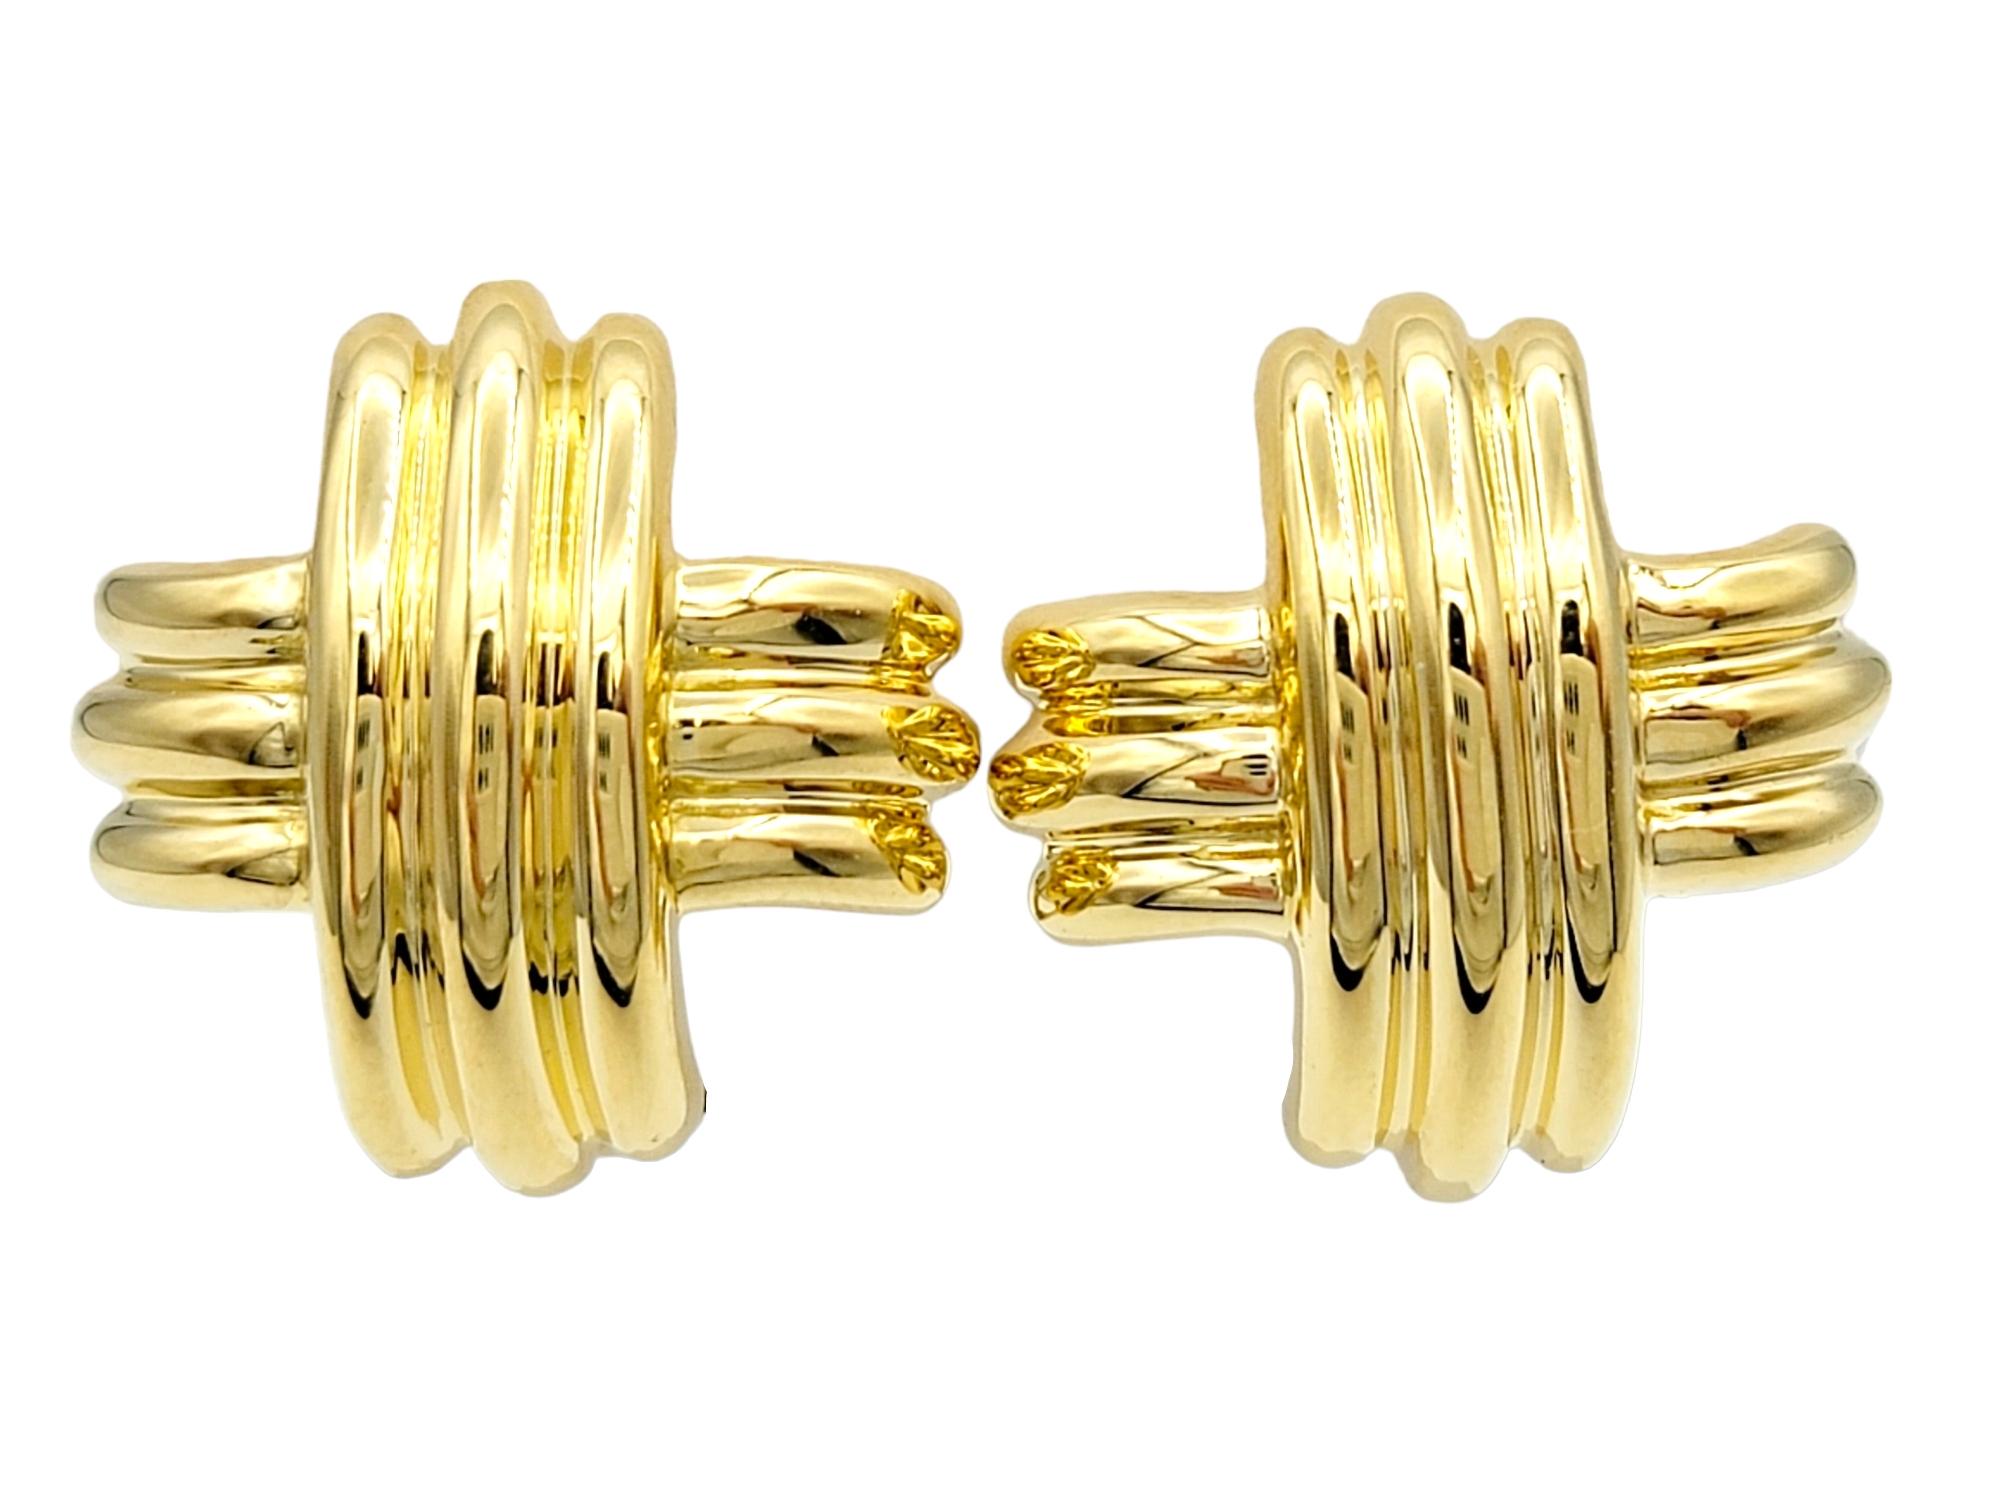 Indulge in the iconic elegance of these Tiffany & Co. gold earrings, a dazzling expression of timeless sophistication crafted in lustrous 18 karat yellow gold. The signature 'X' design, where two ridged pieces elegantly overlap perpendicularly,